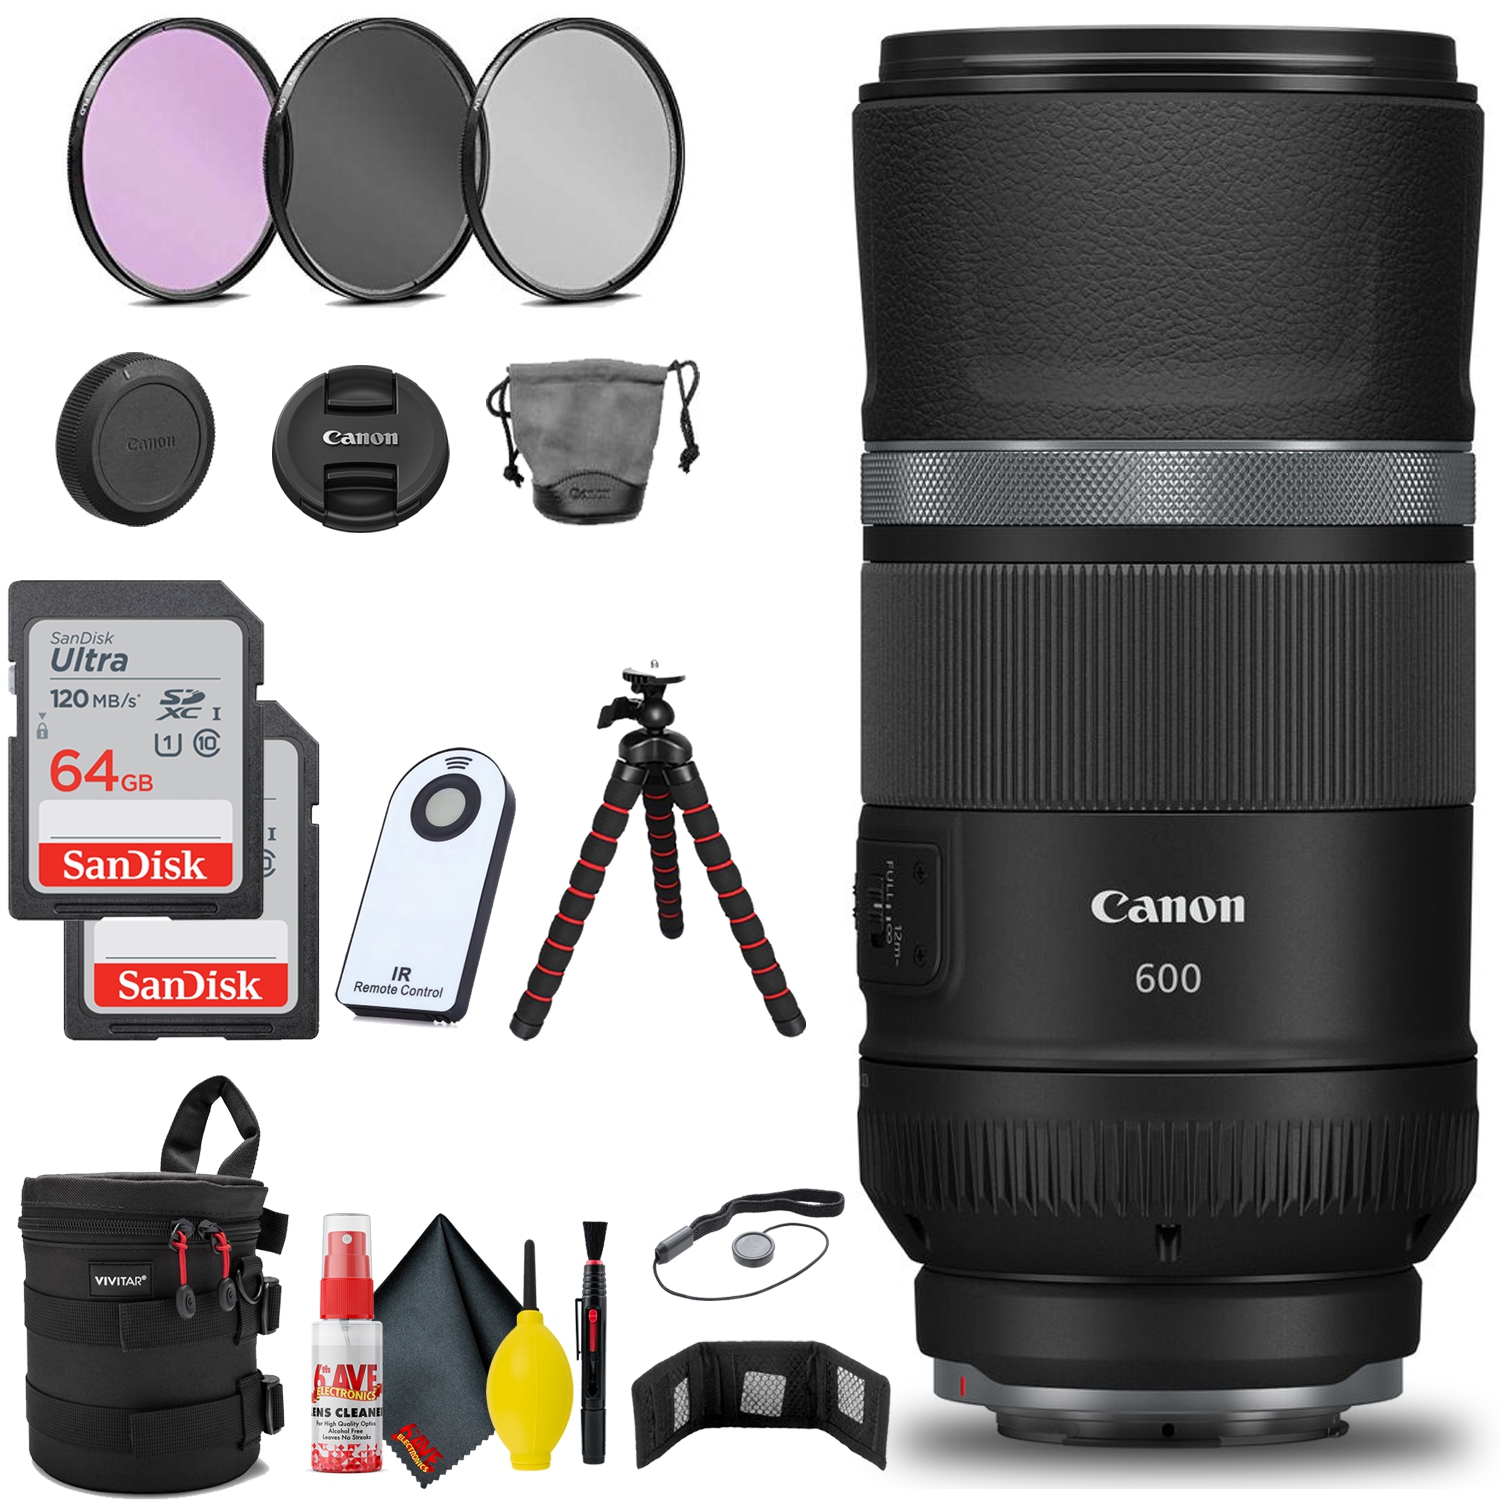 RF 600mm f/11 IS STM Lens + (2) 64GB SD Card Accessories (Bundle)